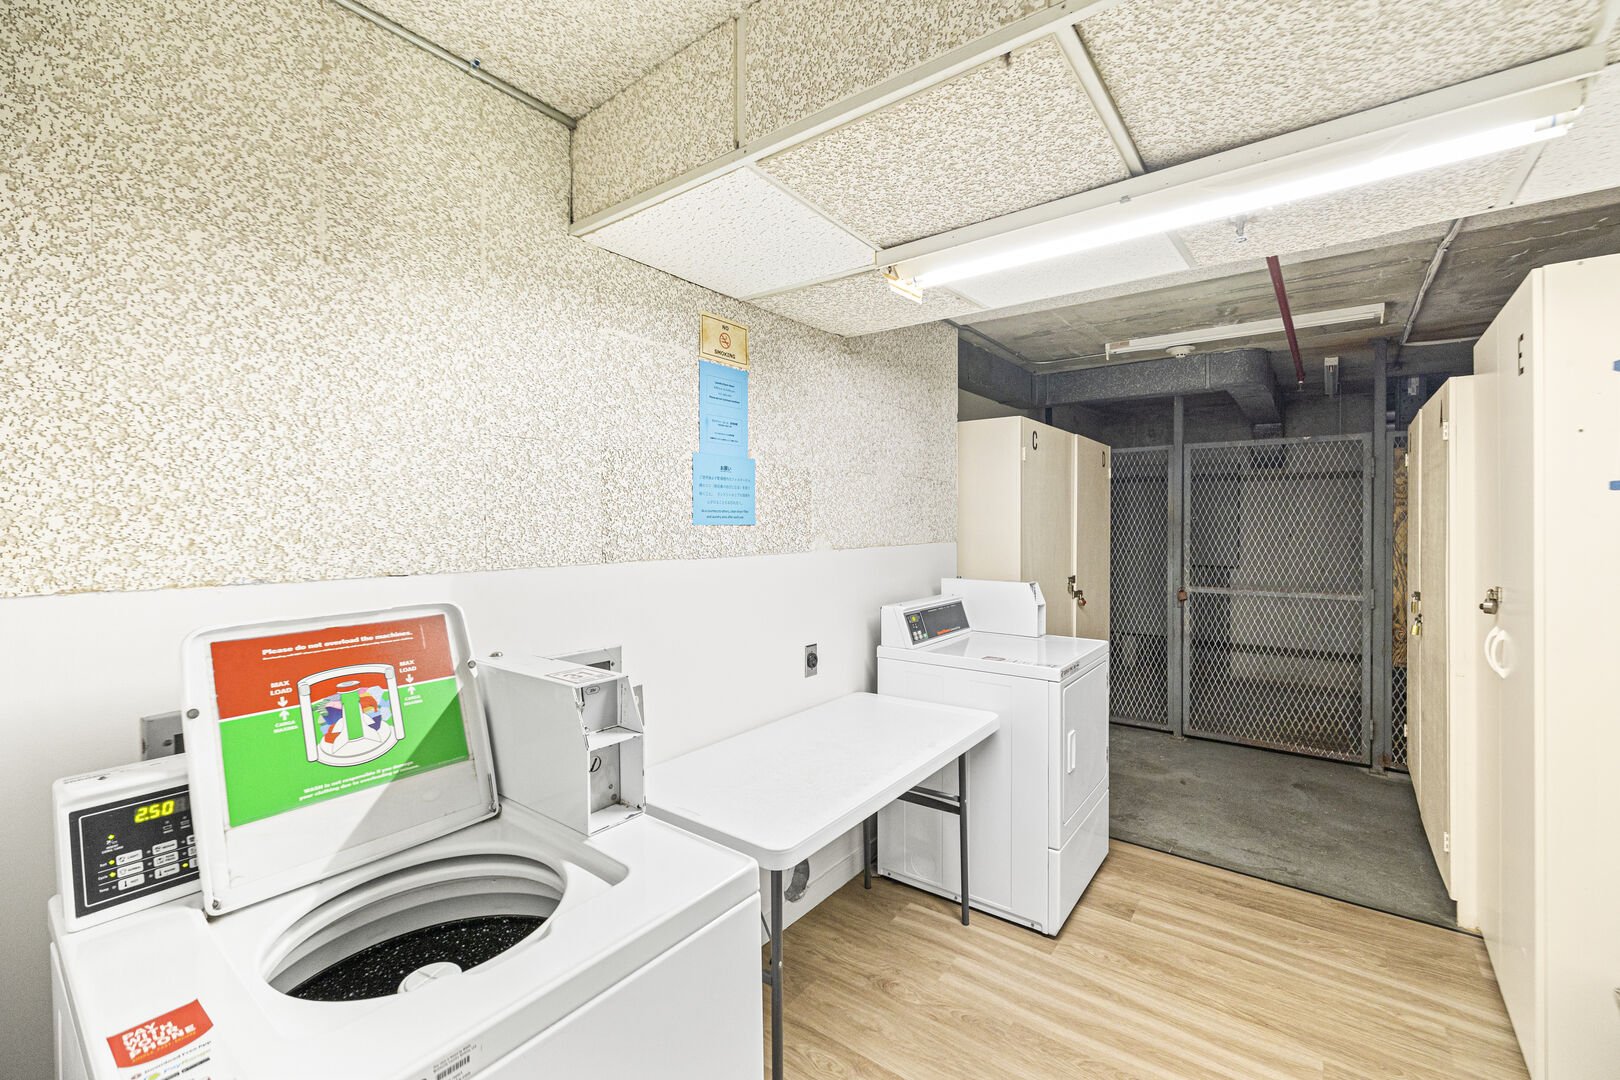 Laundry room in every floor with coin-operated washer and dryer